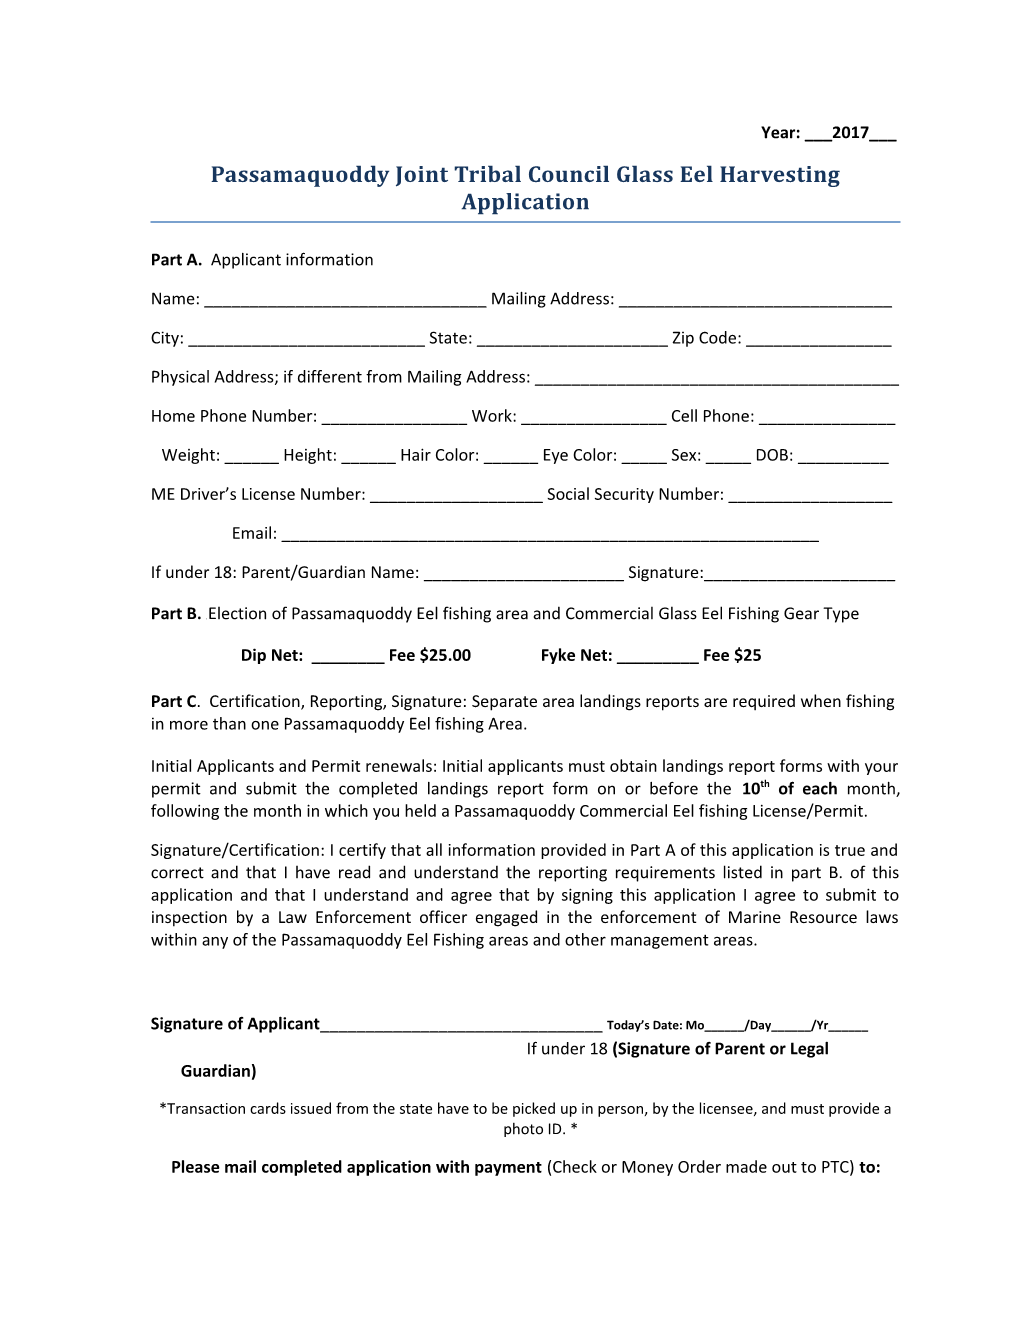 Passamaquoddy Joint Tribal Council Glass Eel Harvesting Application